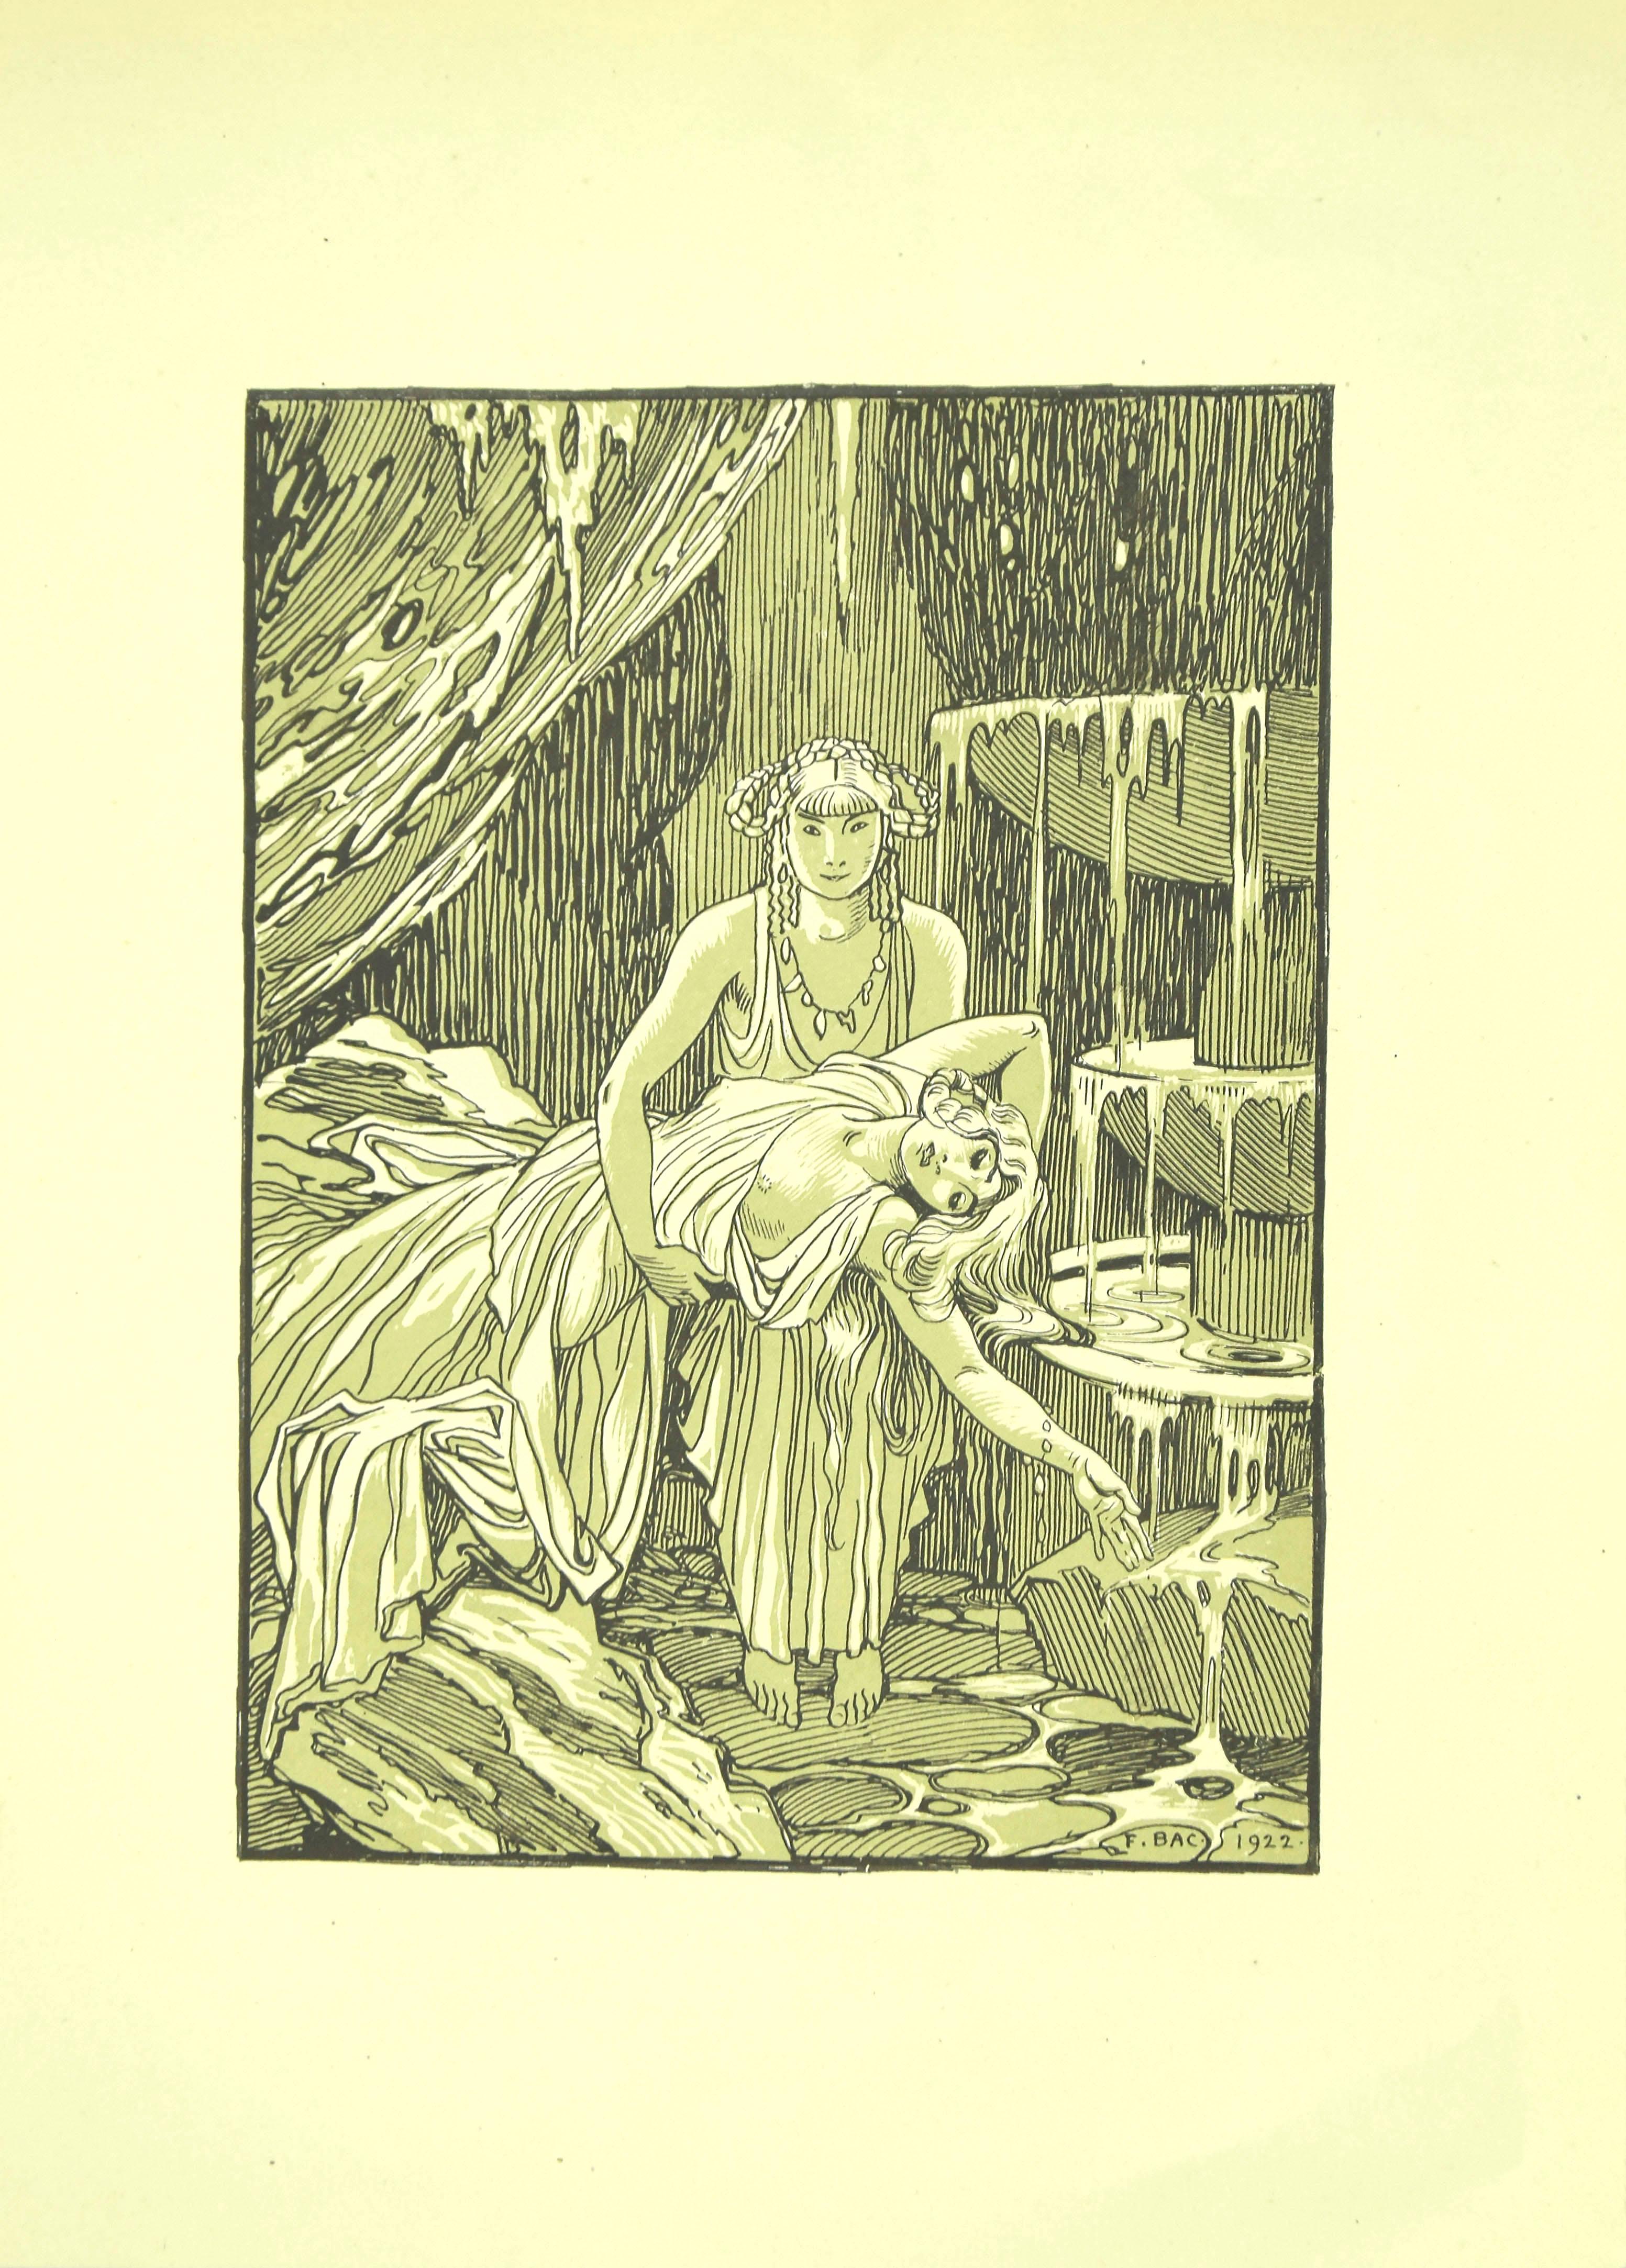 The Fountain - Original Lithograph by F. Bac - 1922